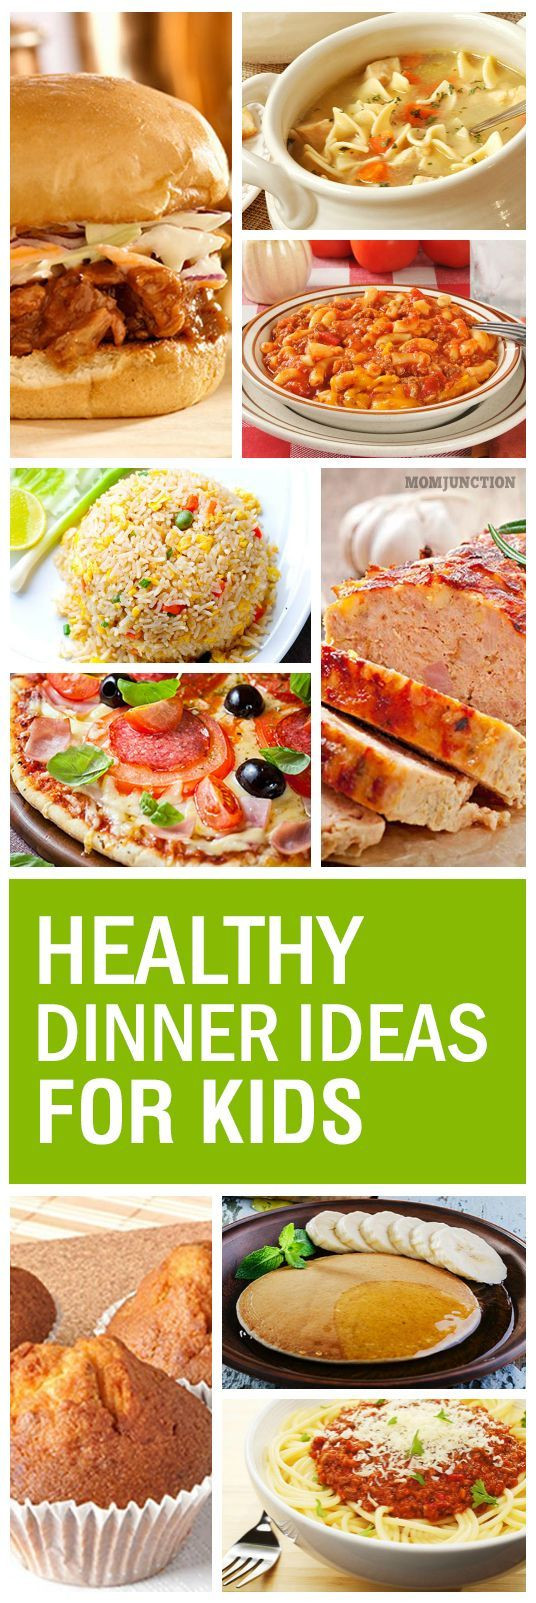 Easy Dinner Recipes For Kids
 15 Quick And Yummy Dinner Recipes For Kids